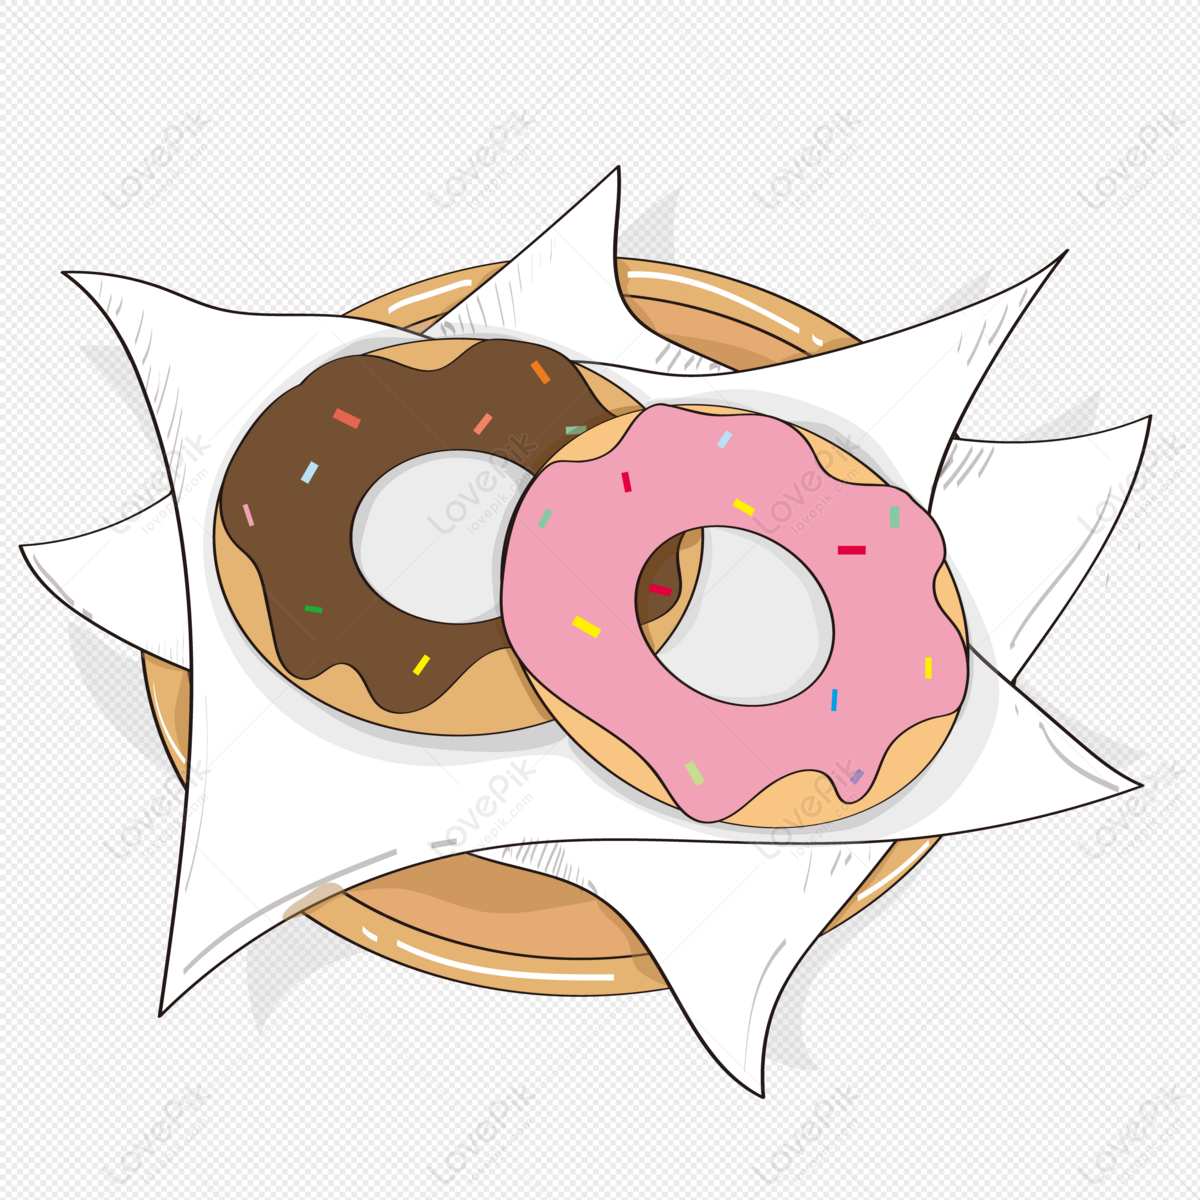 Cartoon Hand Drawn Donut PNG Transparent Image And Clipart Image For Free  Download - Lovepik | 401270557